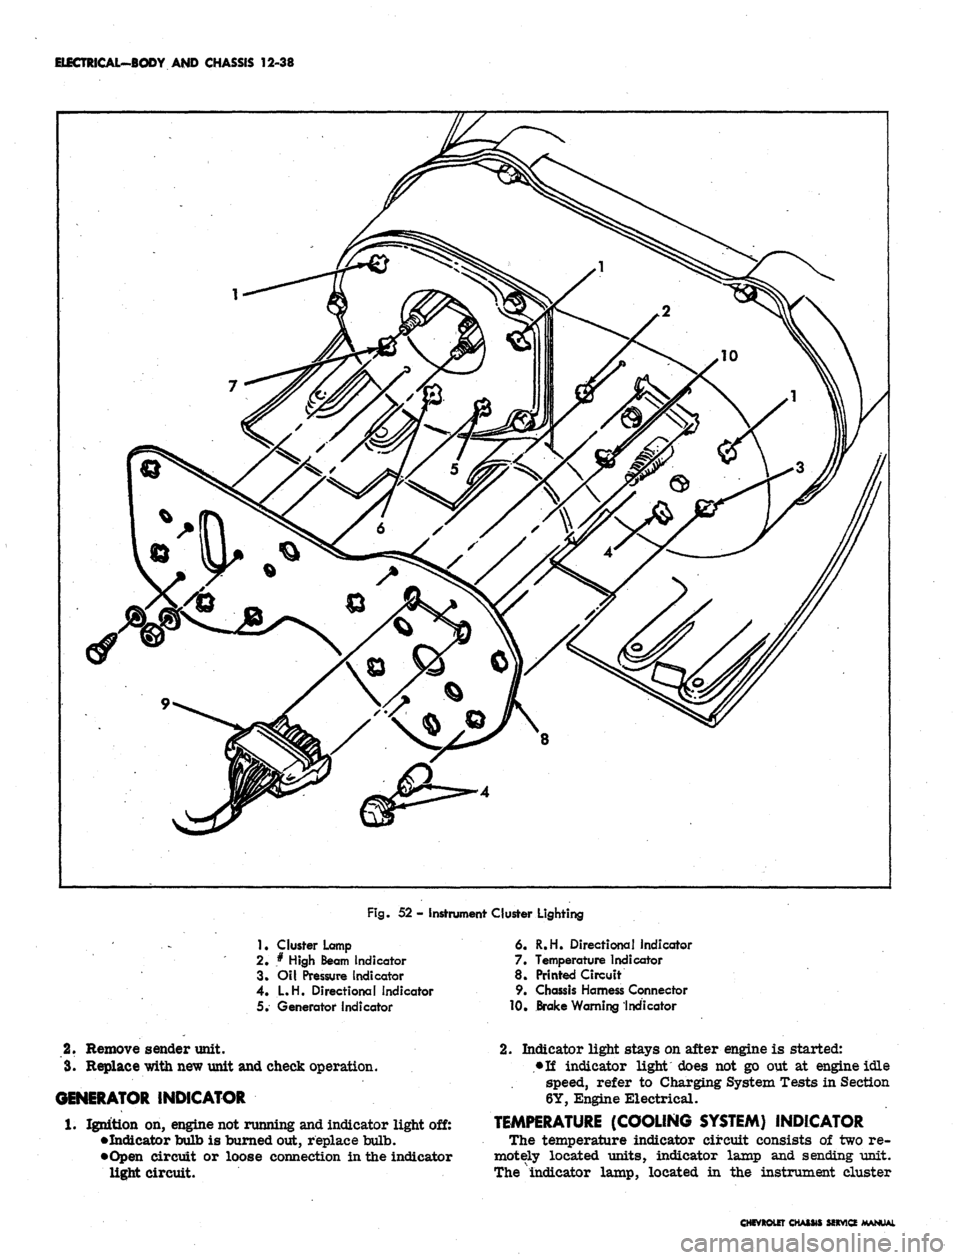 CHEVROLET CAMARO 1967 1.G Chassis Workshop Manual 
ELECTRICAL-BODY AND CHASSIS 12-38

Fig.
 52 - Instrument Cluster Lighting

1
 • Cluster Lamp

2.
 * High Beam Indicator

3. Oil Pressure Indicator

4.
 L.H. Directional Indicator

5. Generator indi